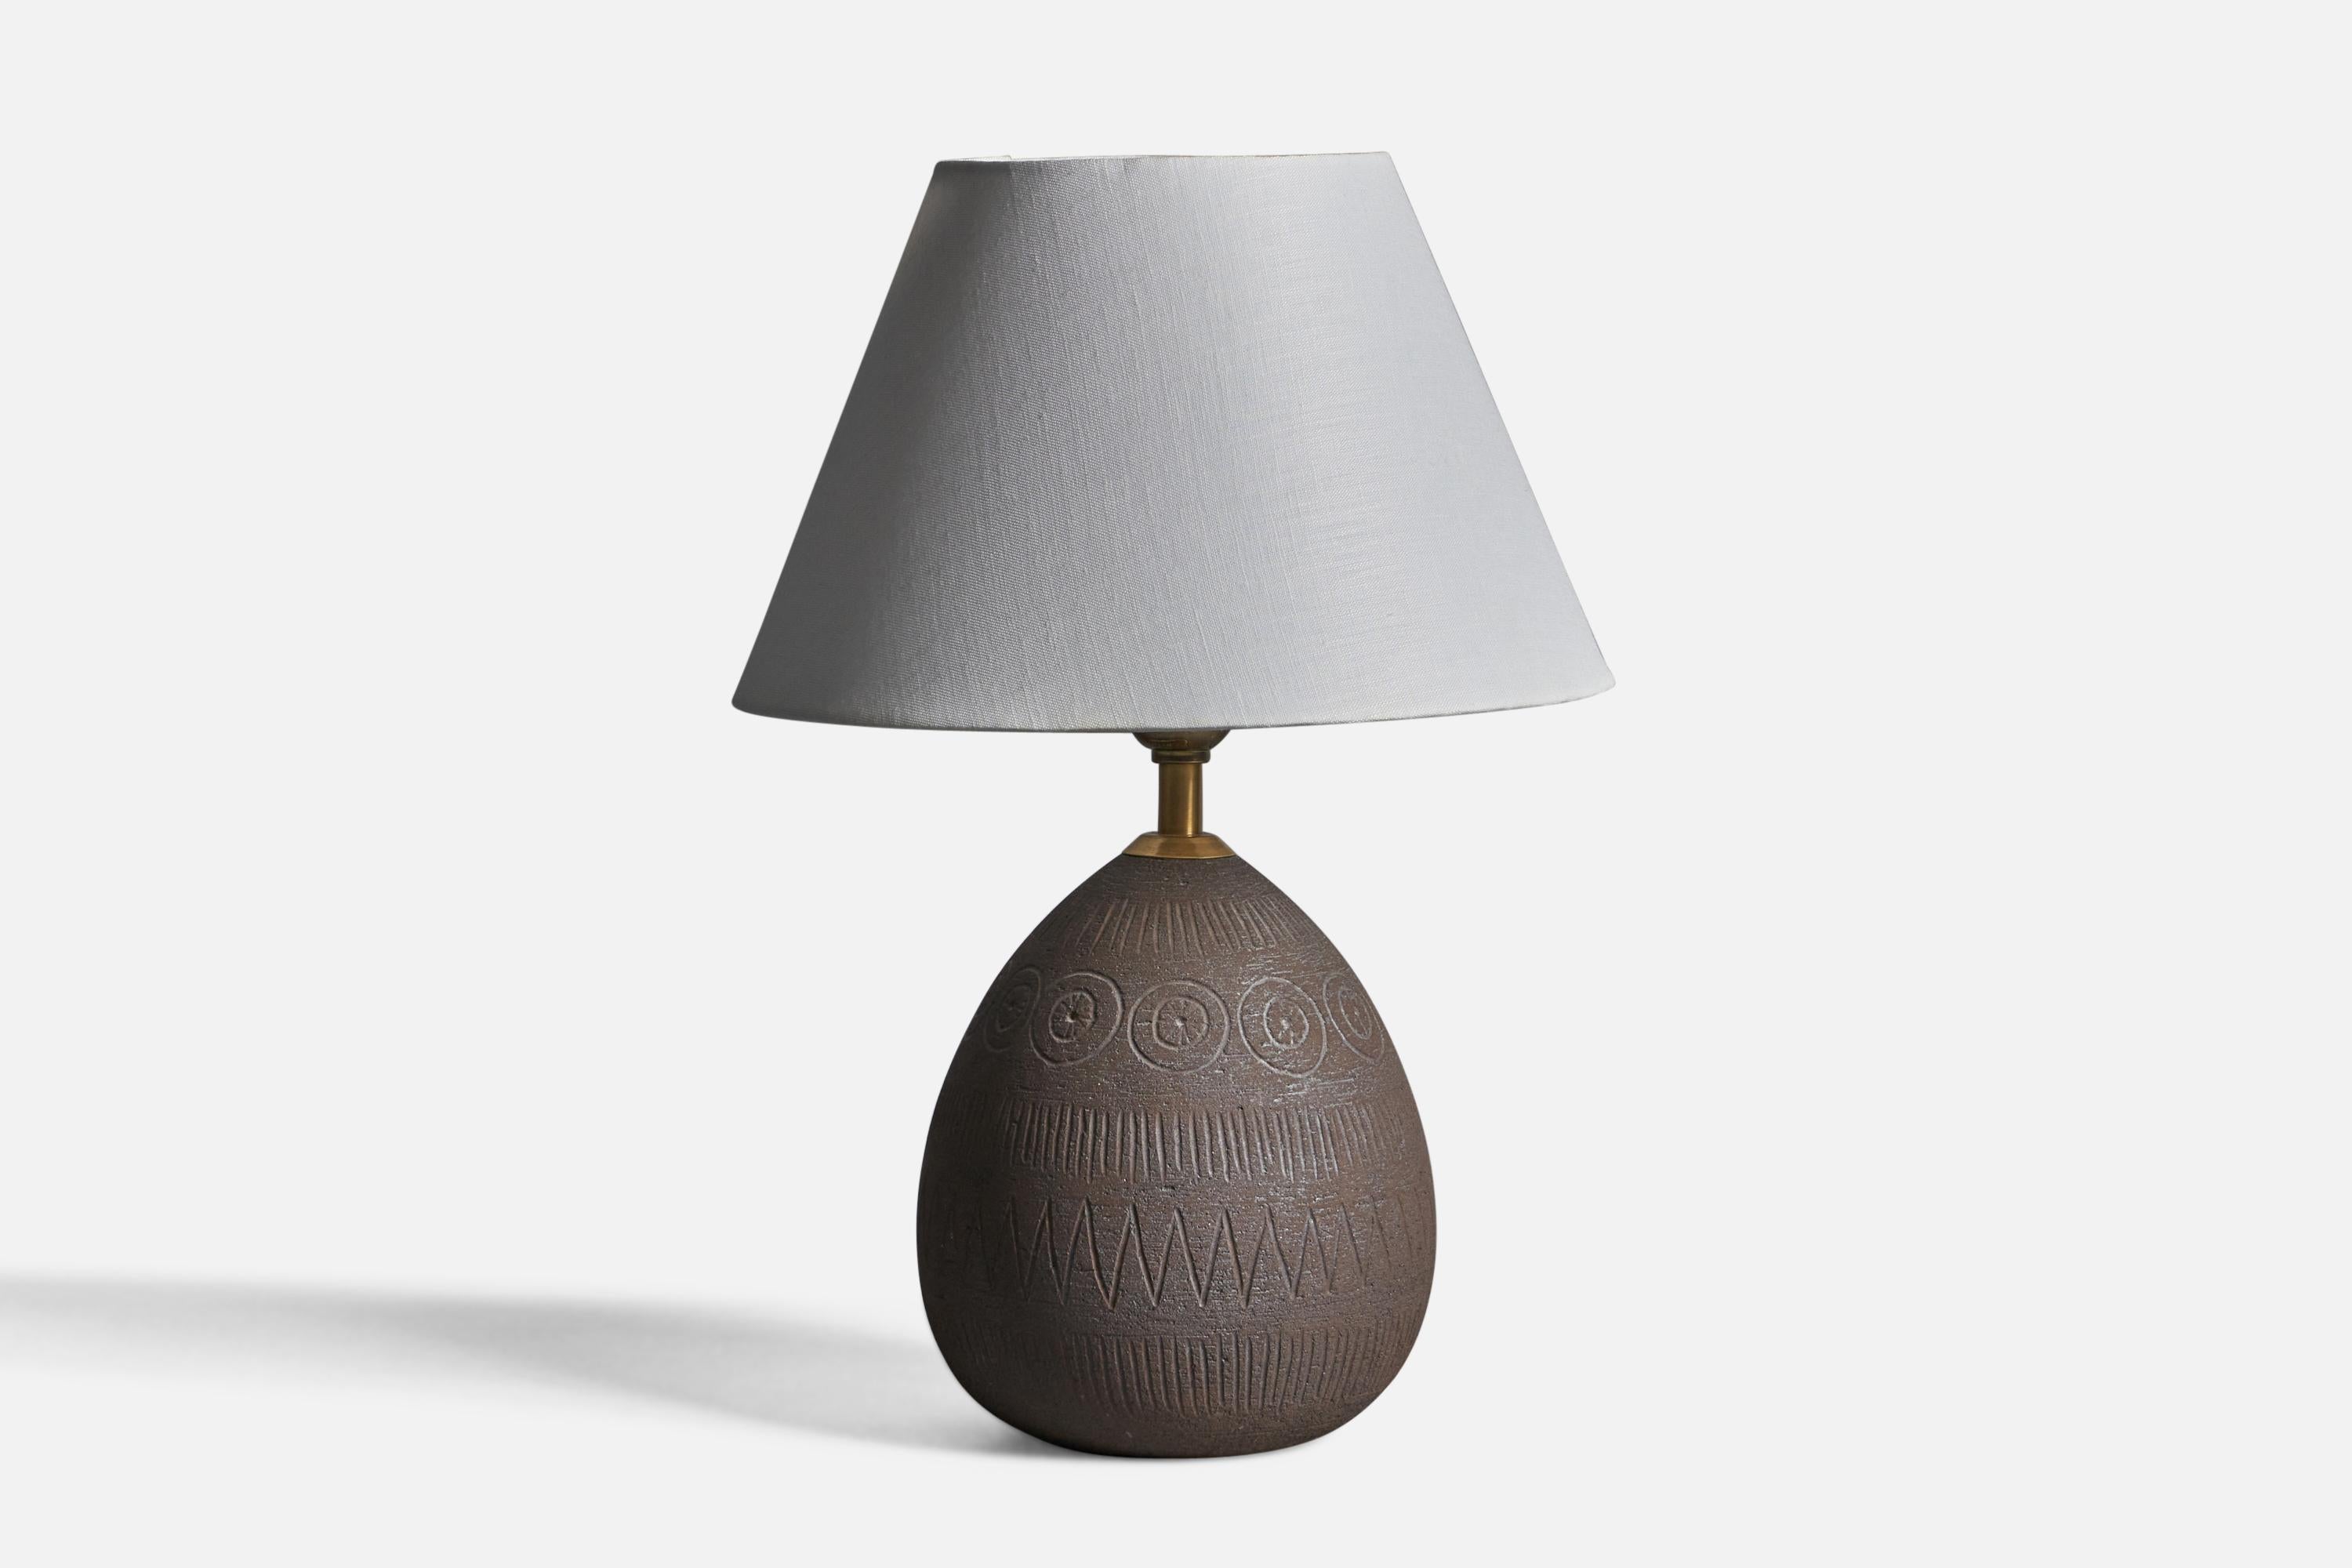 An unglazed incised stoneware and brass table lamp designed and produced by Elsi Bourelius, Sweden, c. 1960s.

Dimensions of Lamp (inches): 10.5